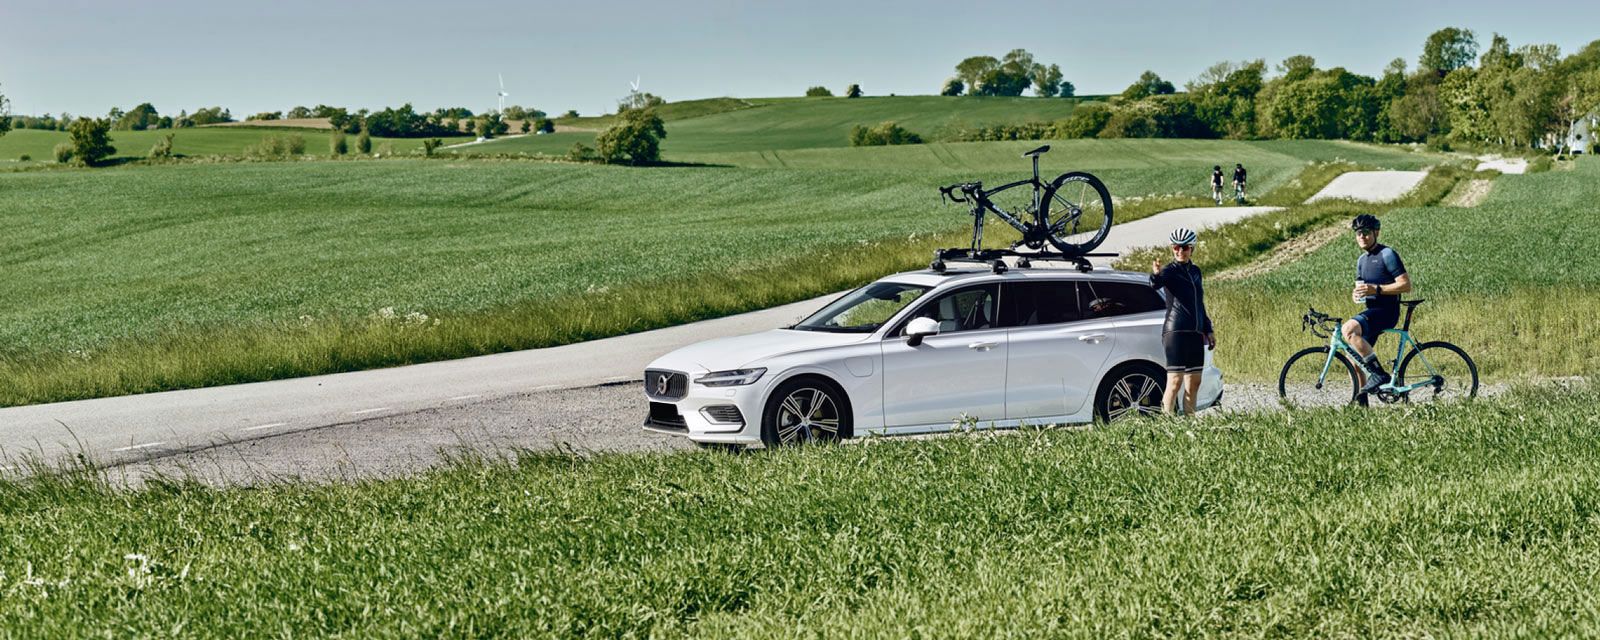 Two cyclists prepare for a bike trip in a field next to their vehicle with their bikes in a Thule bicycle rack.